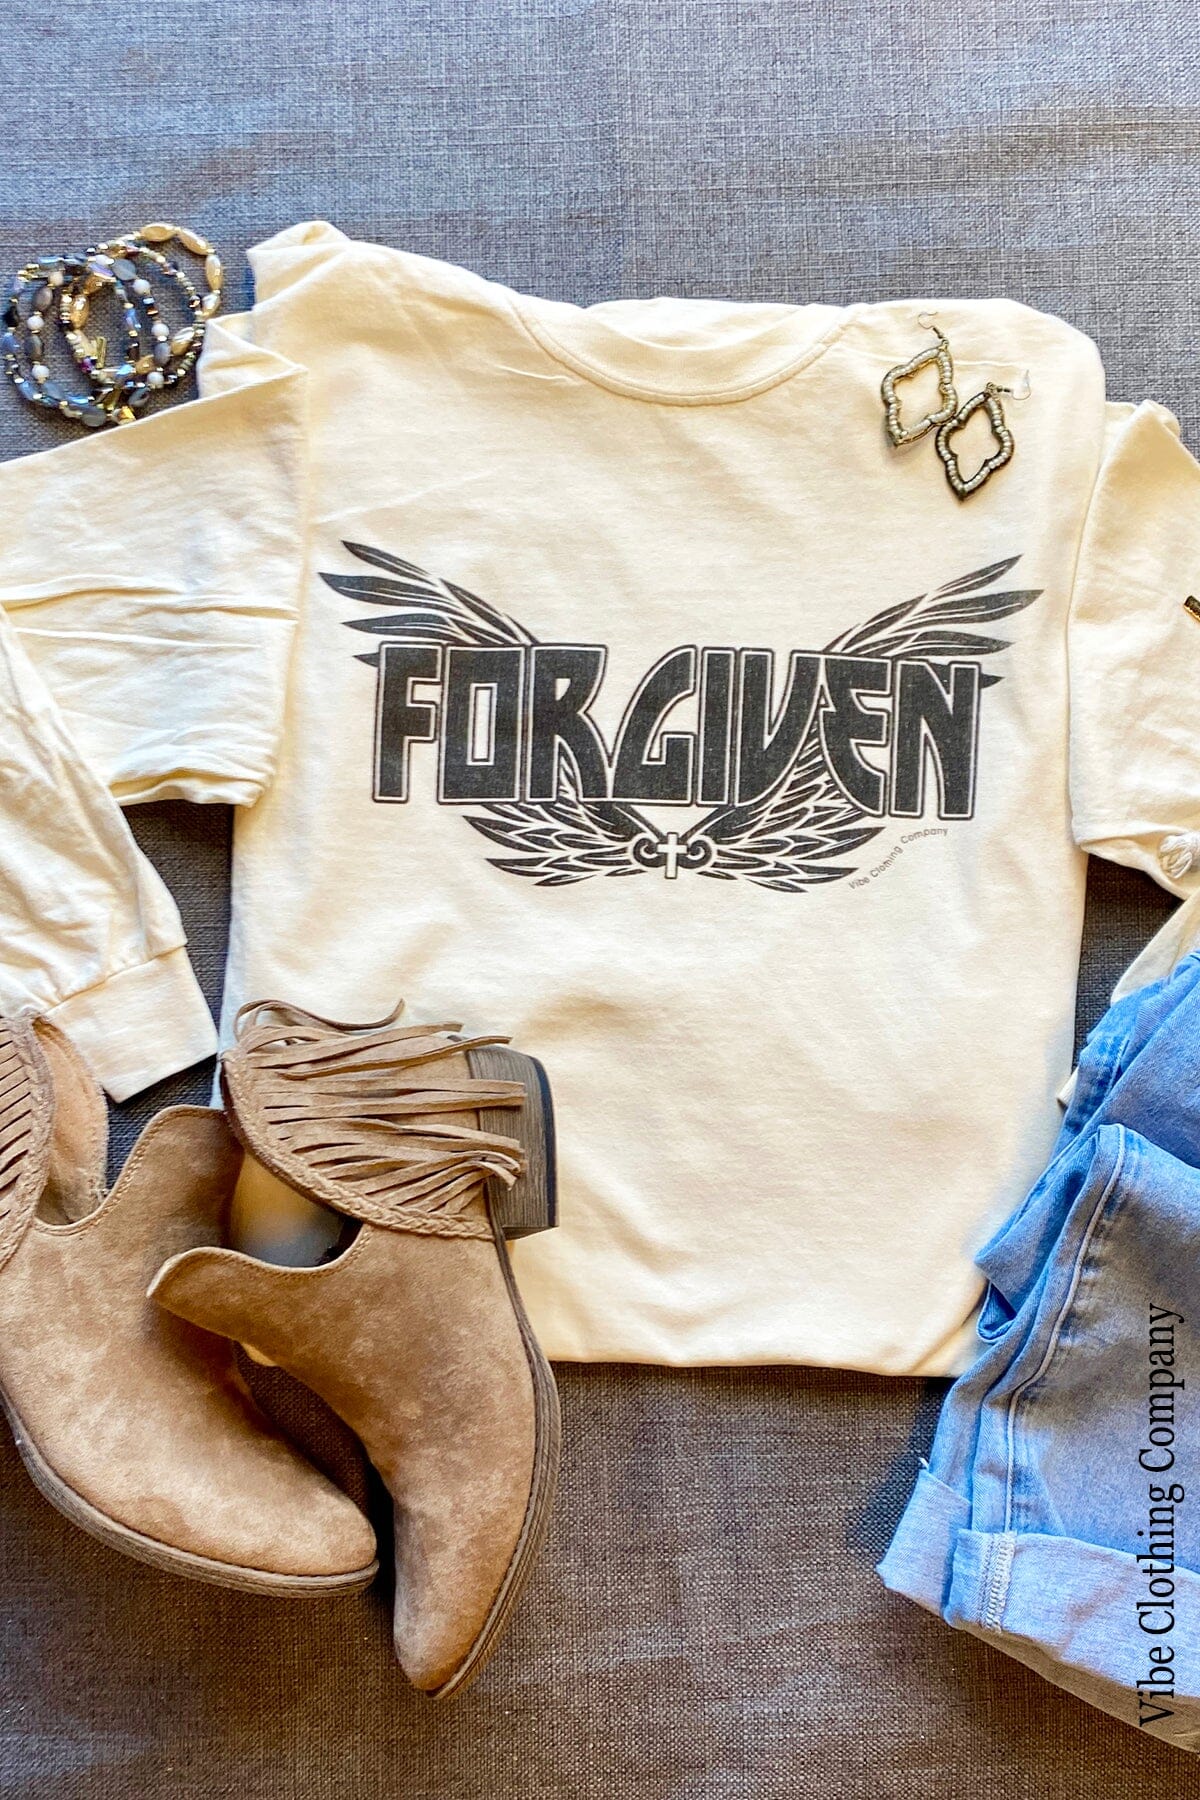 Forgiven Graphic Tee graphic tees VCC 